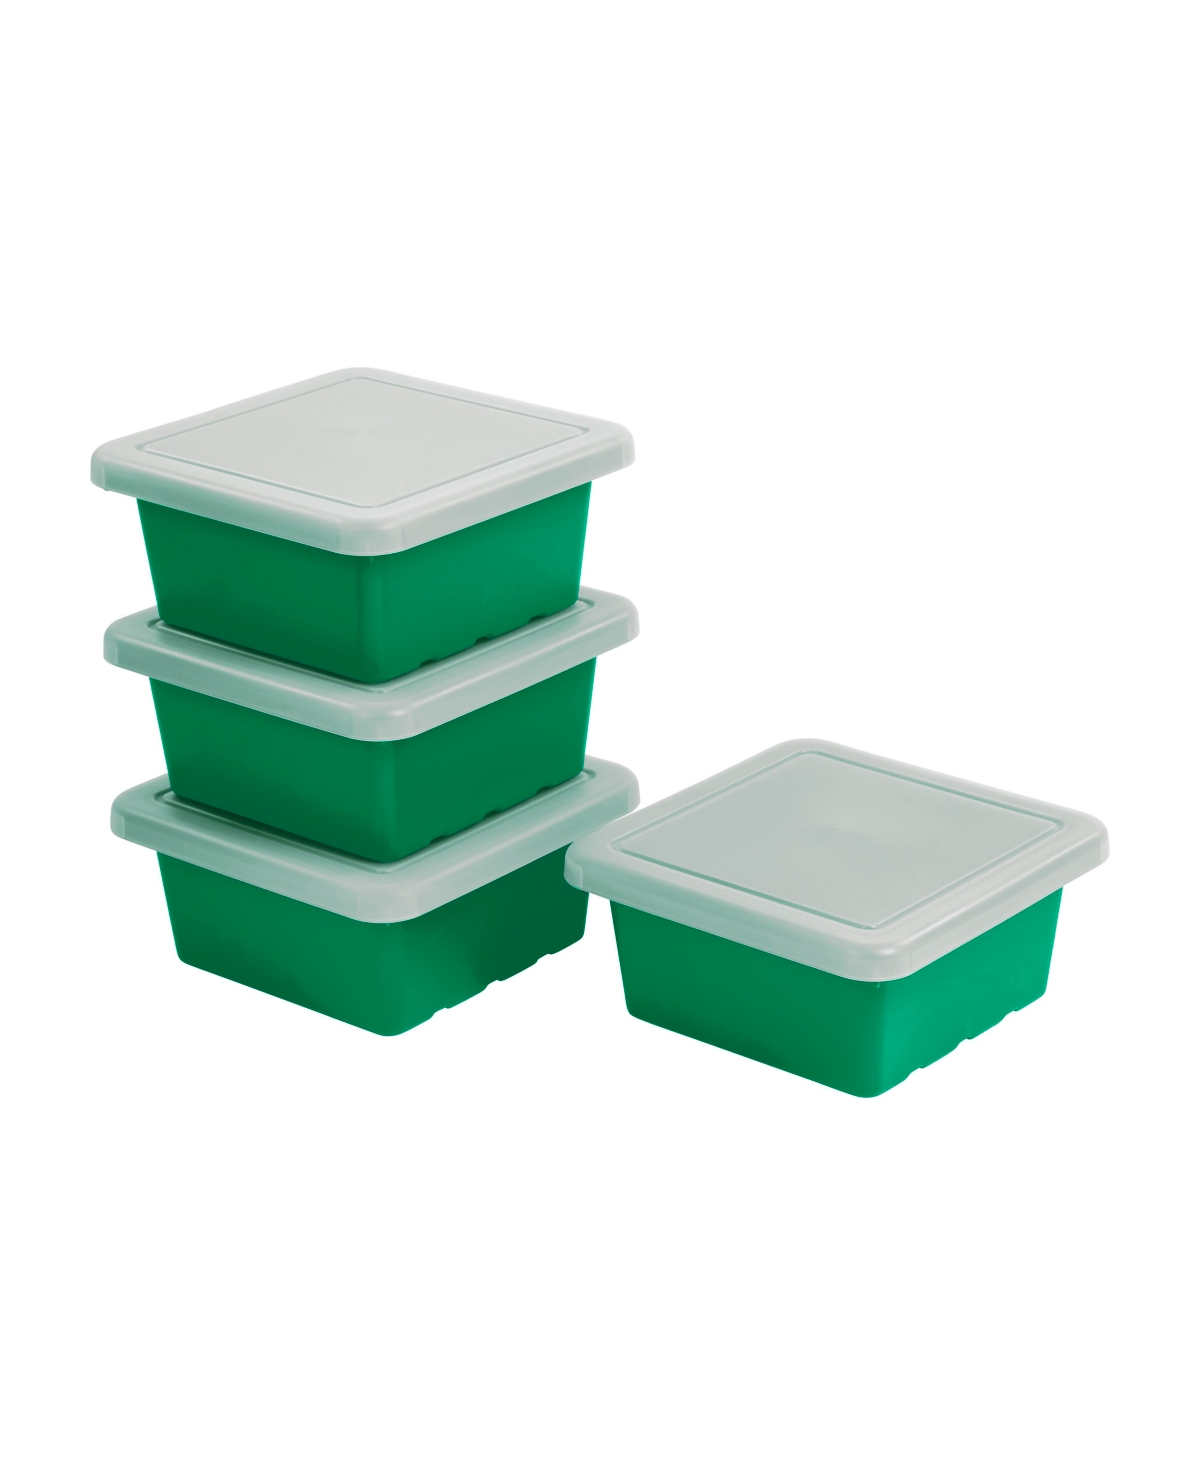 Square Bin with Lid, Storage Containers, Fern Green, 4-Pack - Turquoise